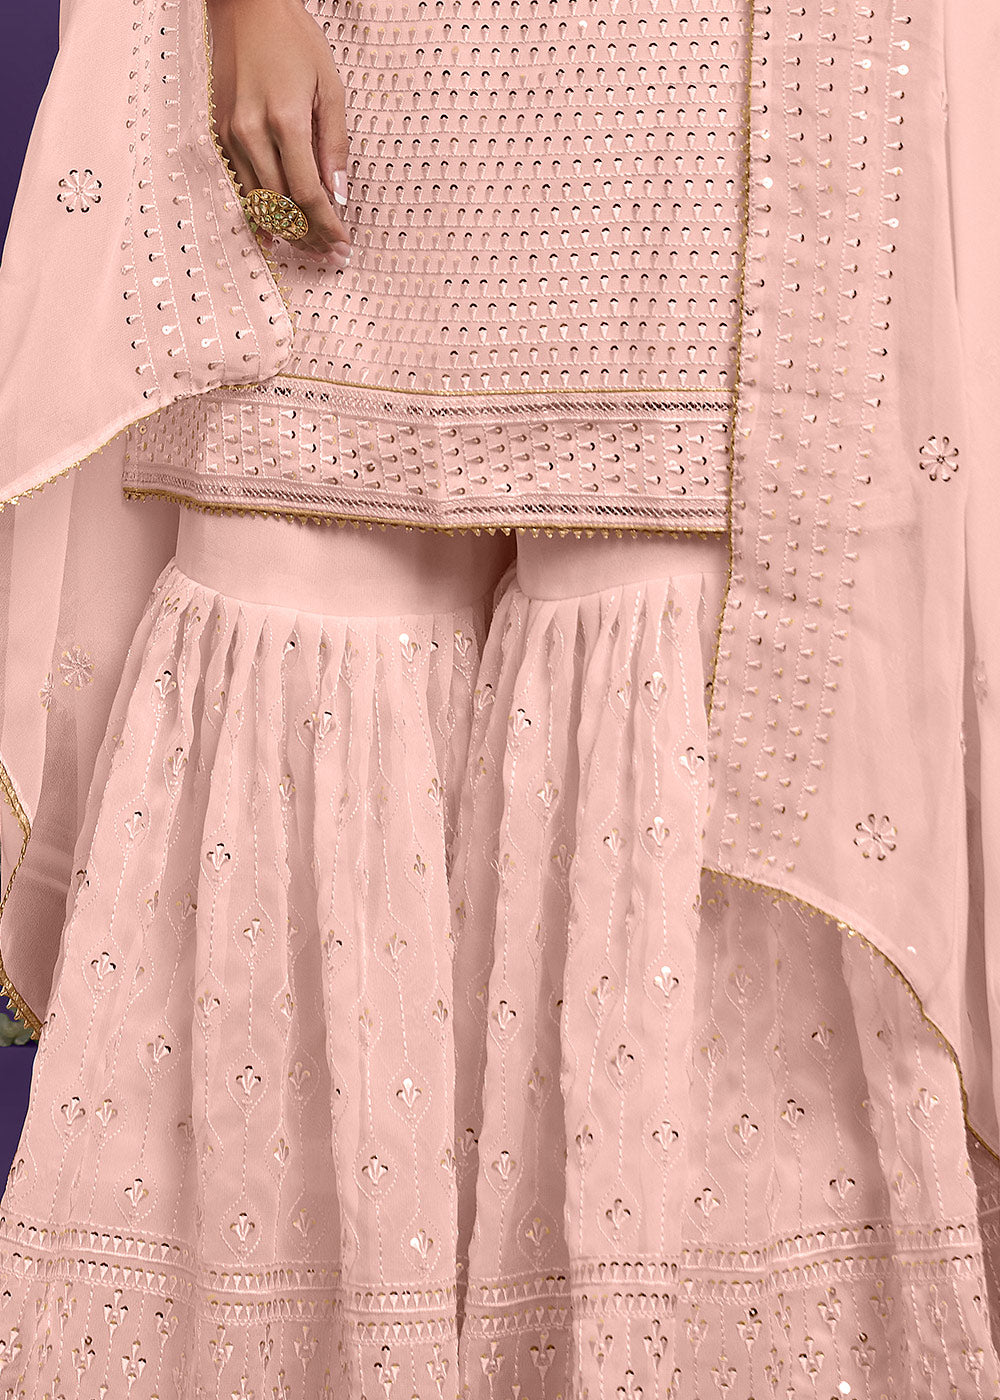 Crepe Pink Georgette Sharara Suit with Thread, Sequins & Khatli work By Qivii